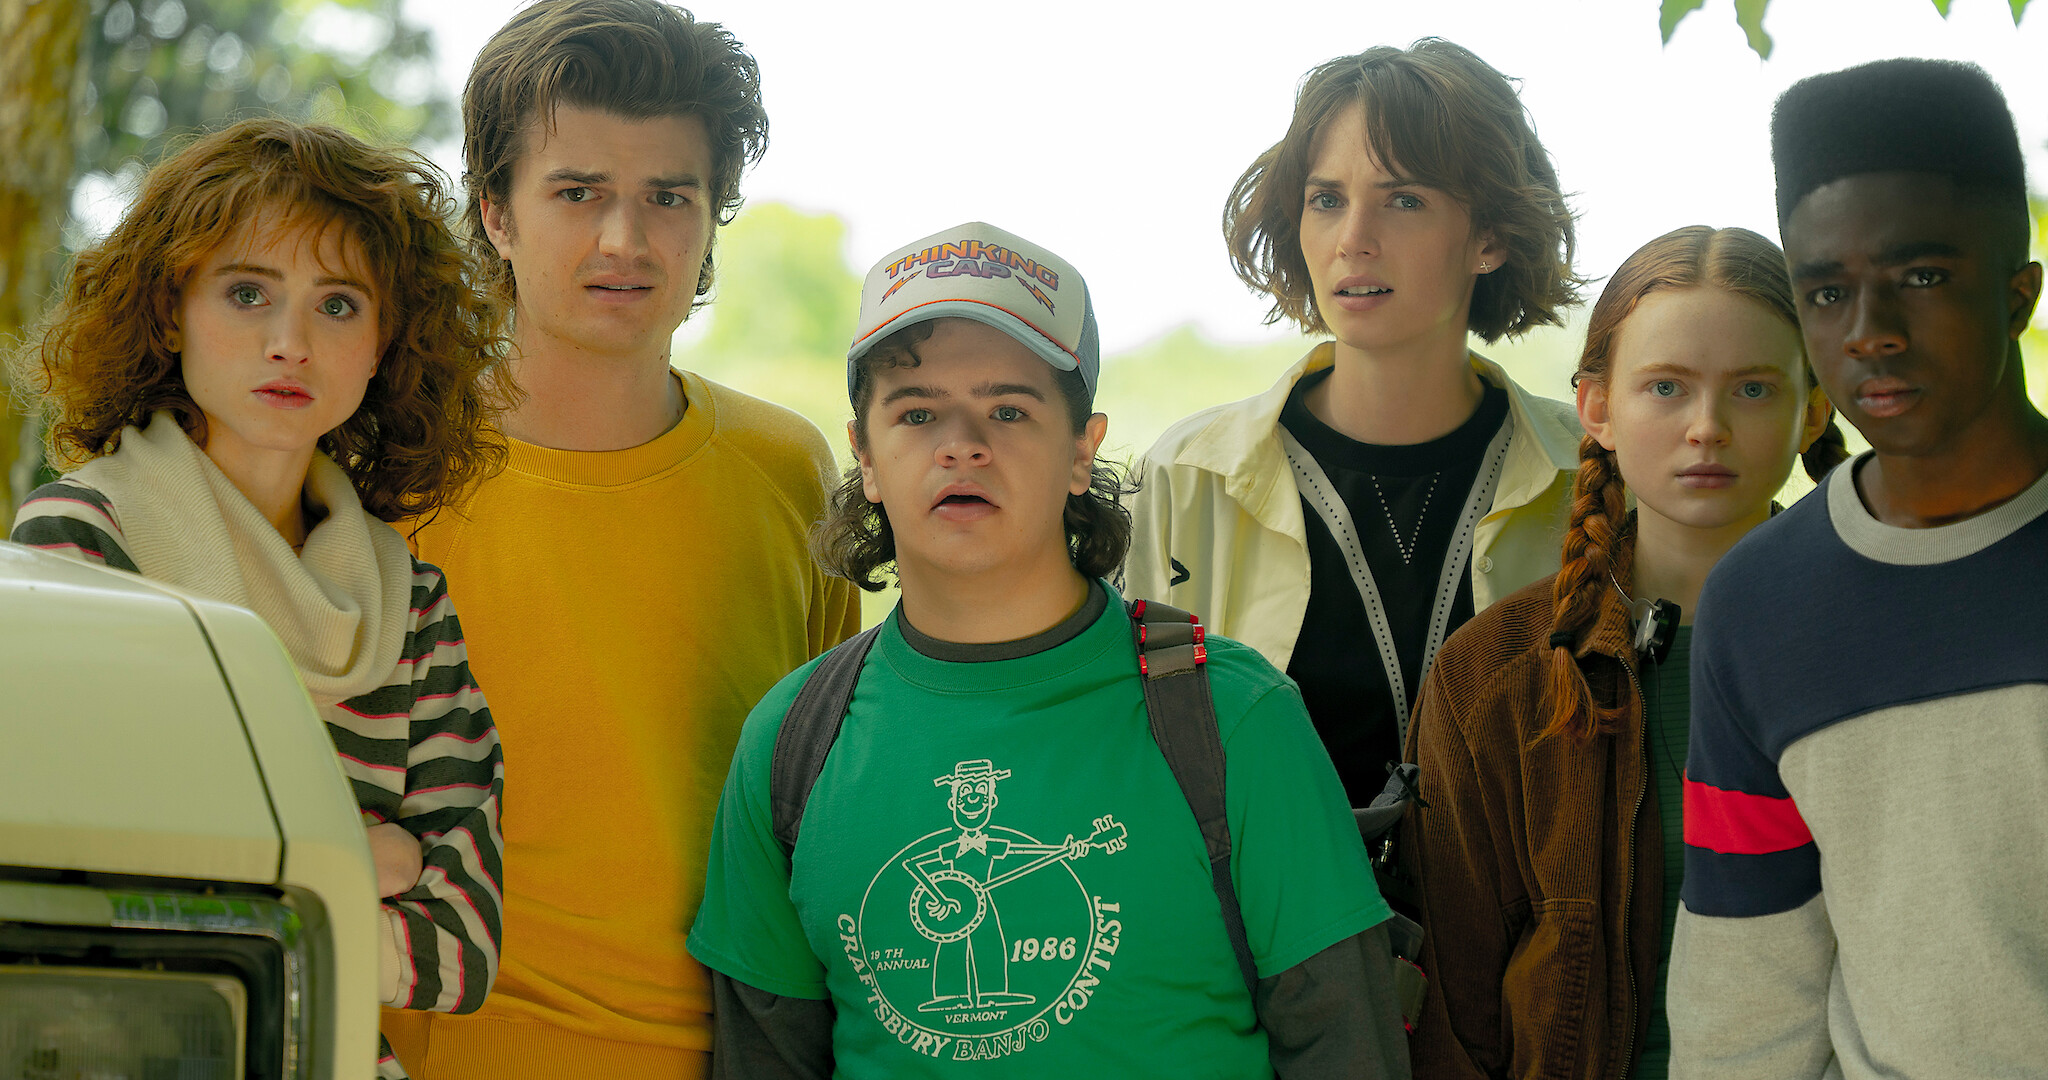 Netflix's 'Stranger Things' Will End After Season 5 - Knight Edge Media